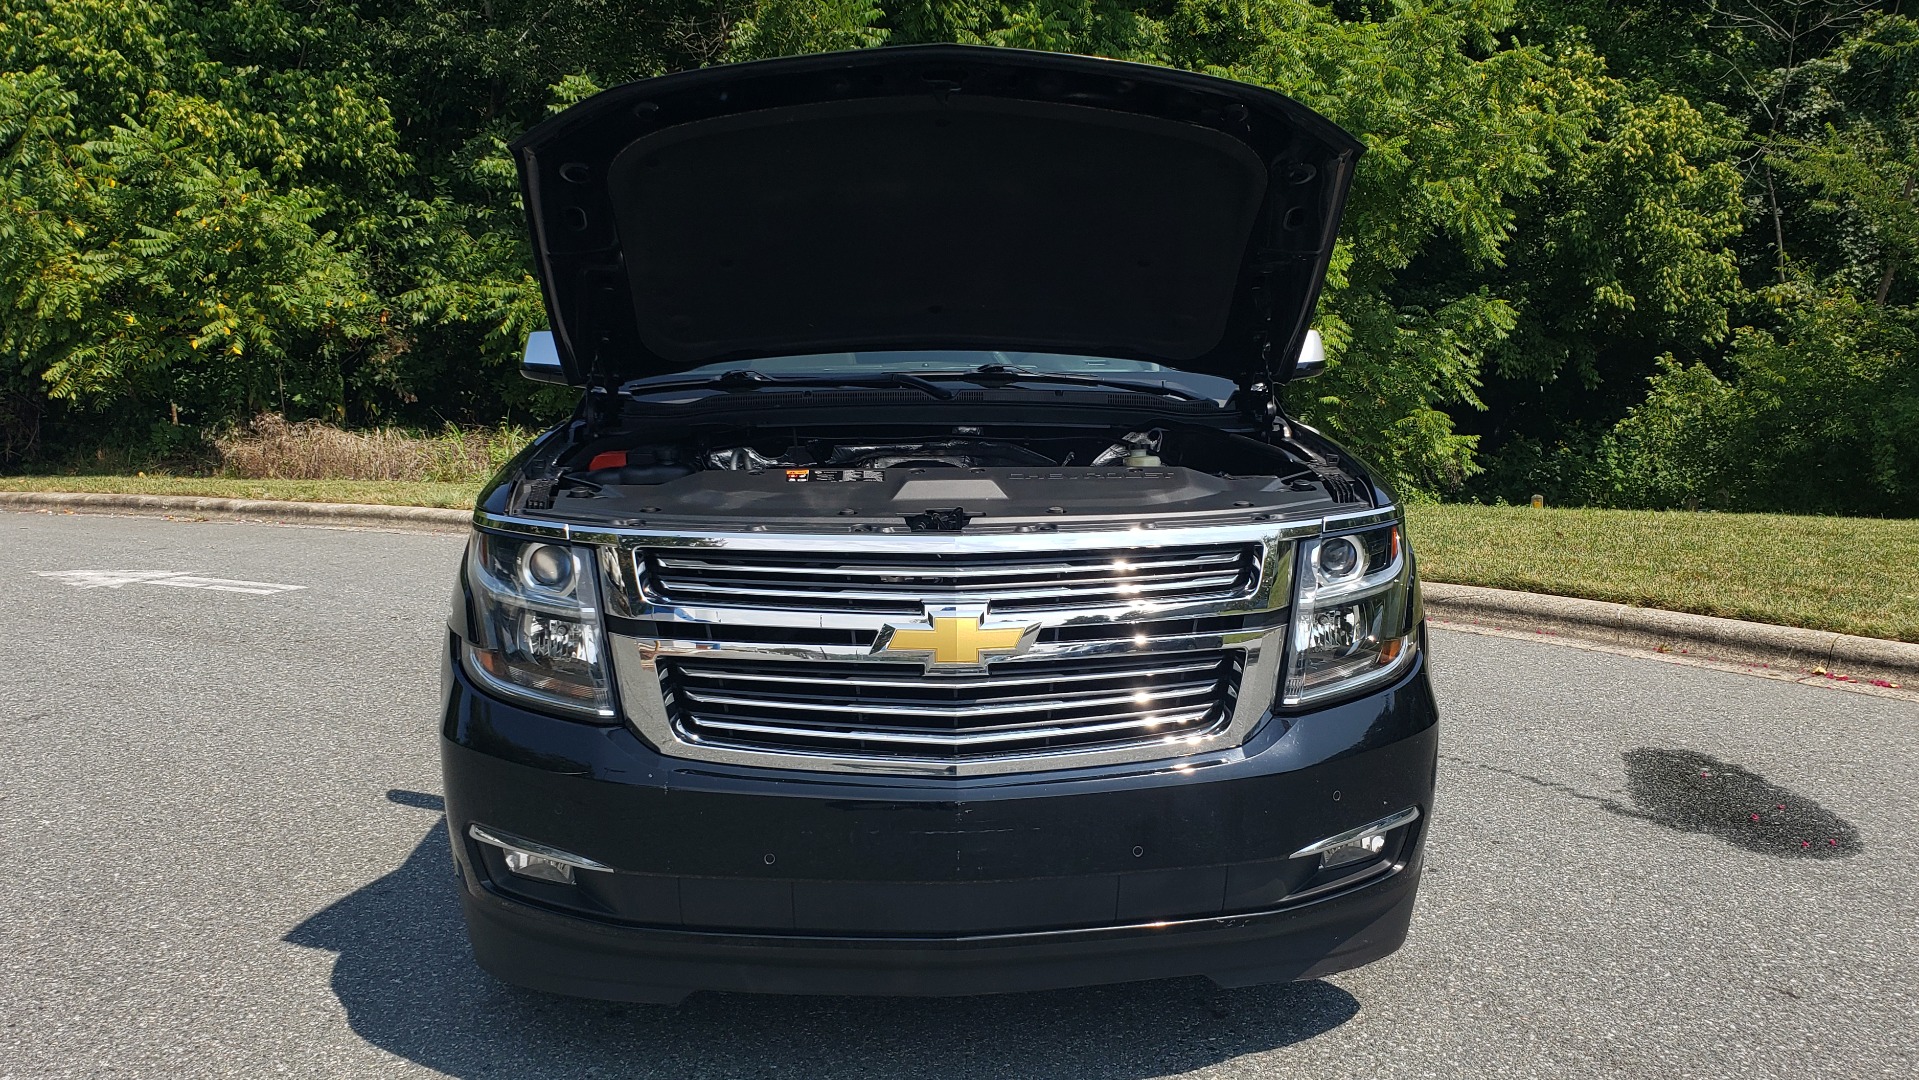 Used 2015 Chevrolet SURBURBAN LTZ 4WD / NAV / SUNROOF / 3-ROW / ENTERTAINMENT / REARVIEW for sale Sold at Formula Imports in Charlotte NC 28227 57